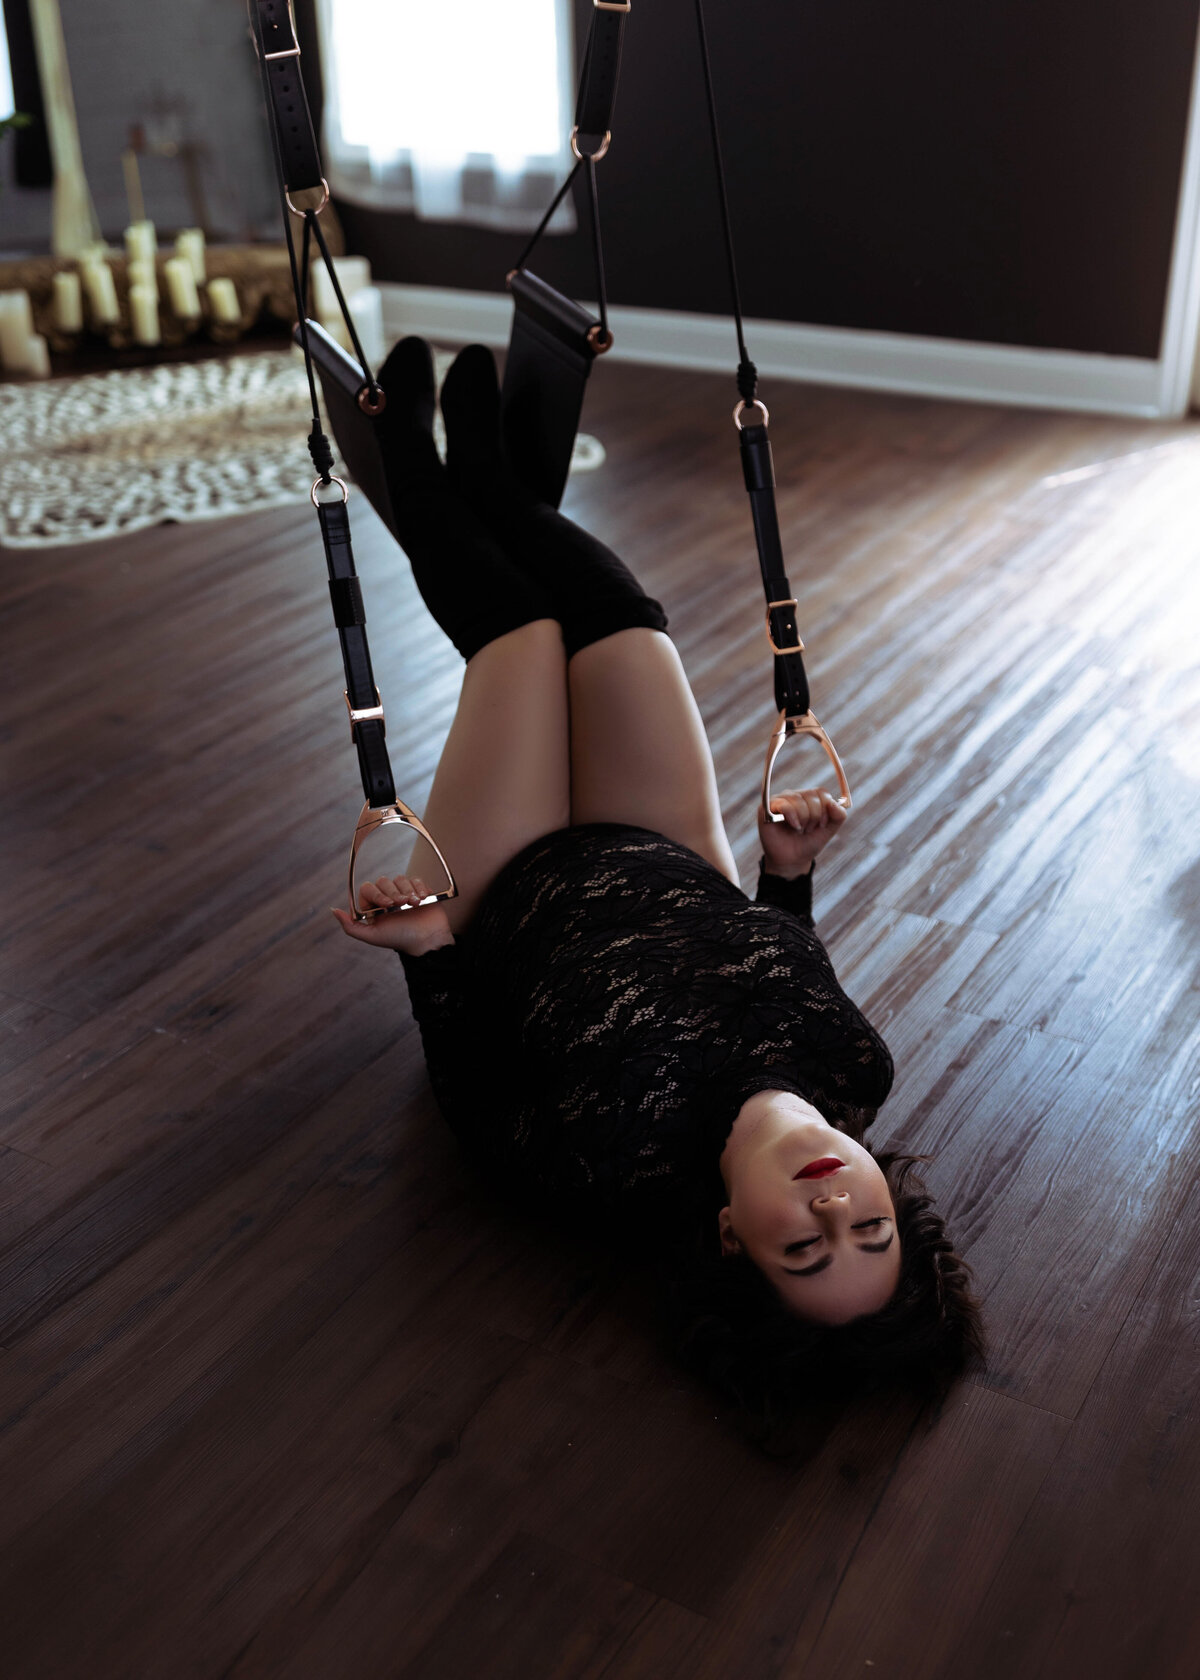 woman in black lingerie and heeled black boots laying on ground holding sex swing handles